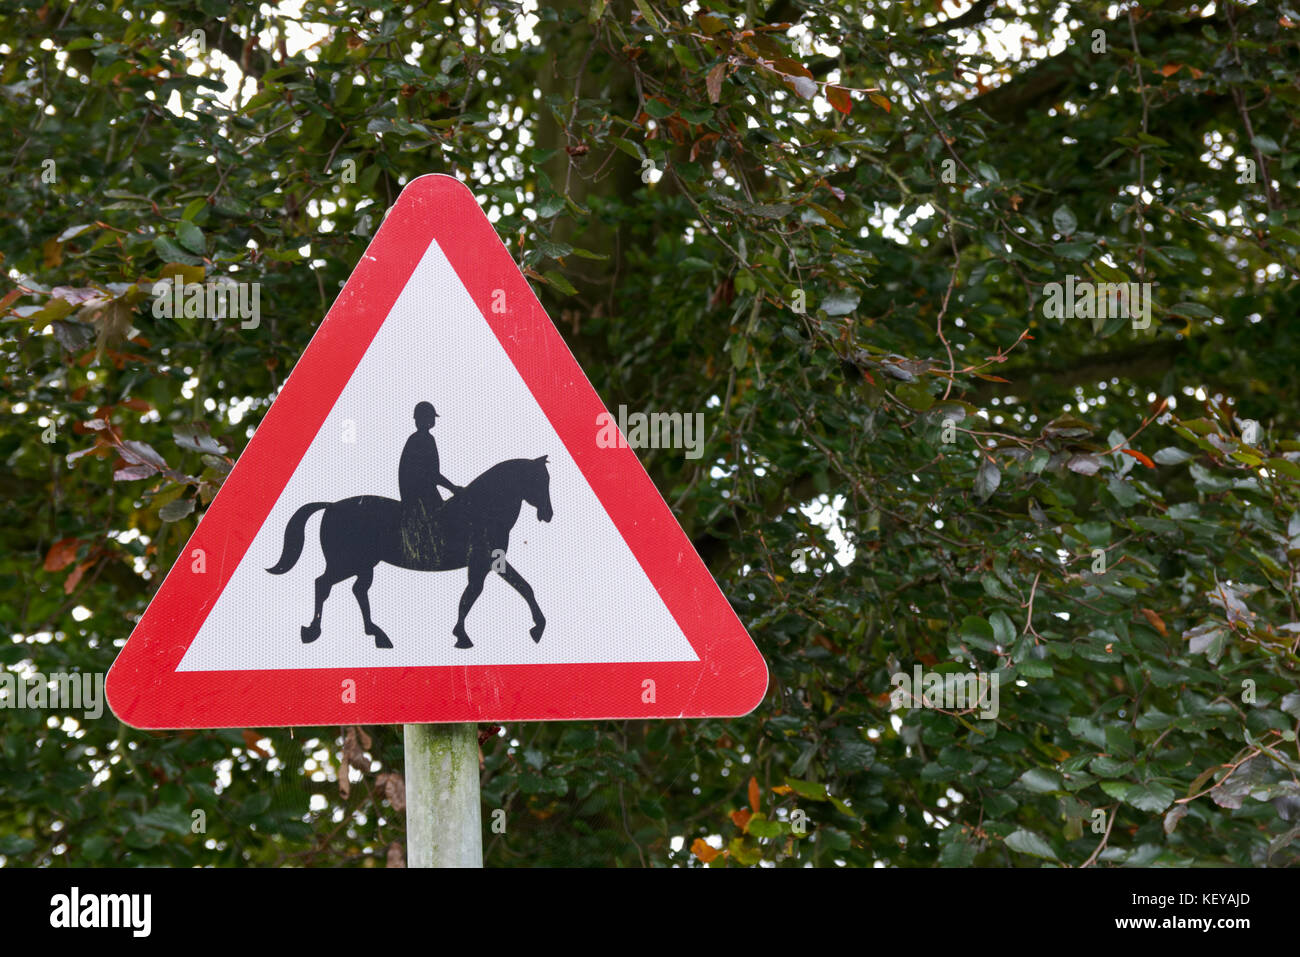 Horses and horse riders in road warning sign on left hand side of image. Black horse on white background in red triangle. Green foliage background Stock Photo